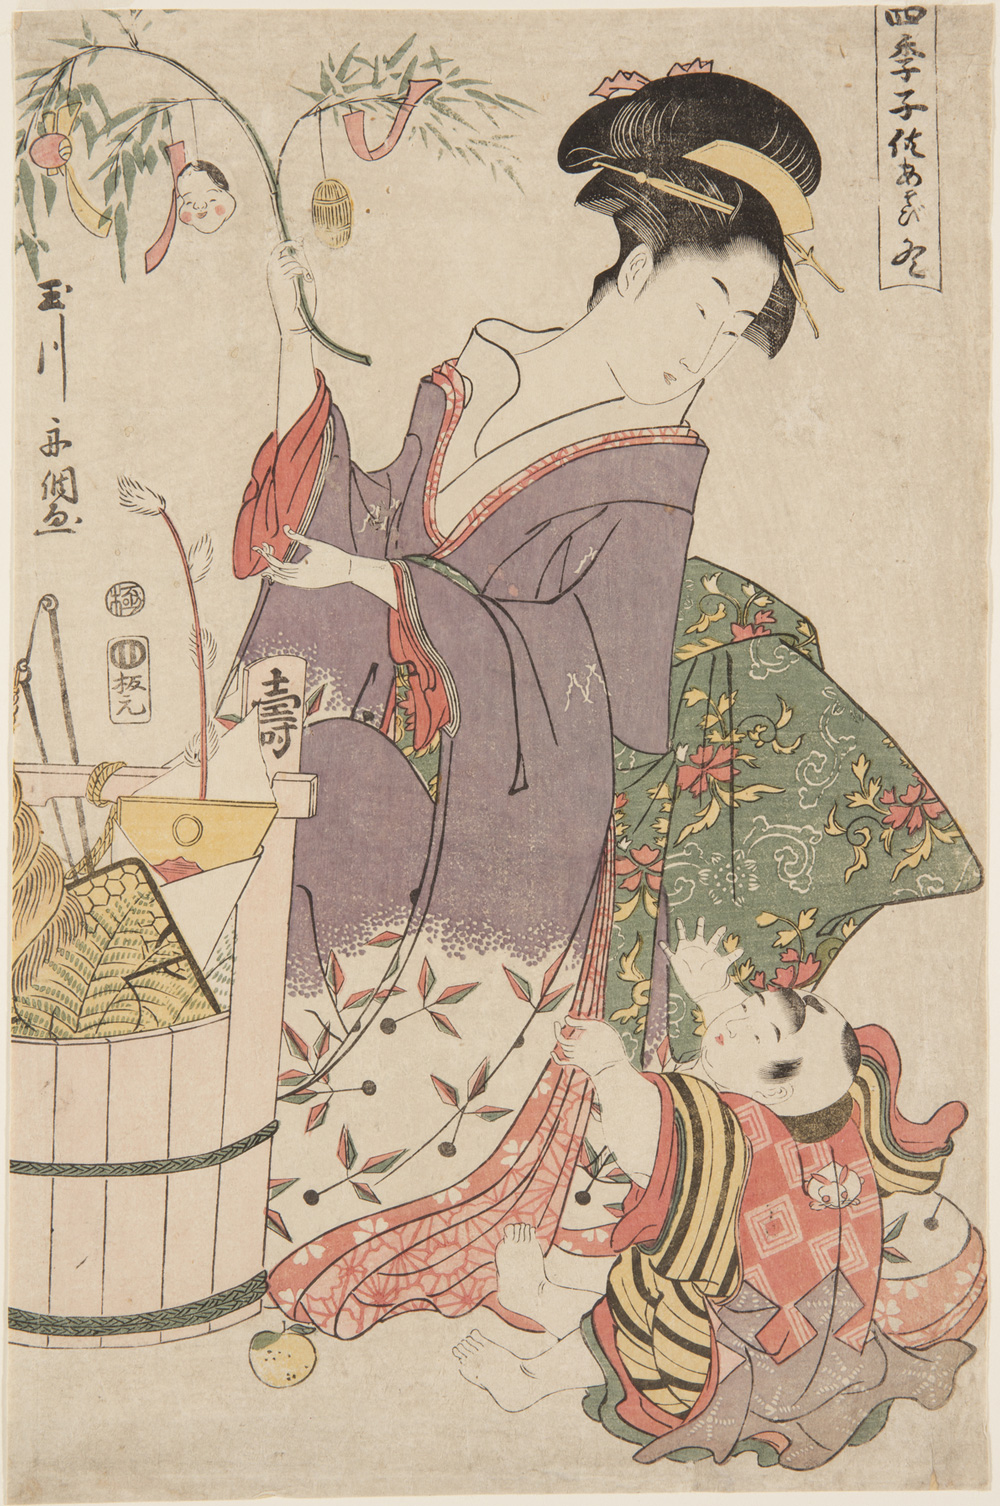 Japanese print of a woman dressed in traditional clothes holding a decorated branch, she looks down at a small child who is reaching up to her.